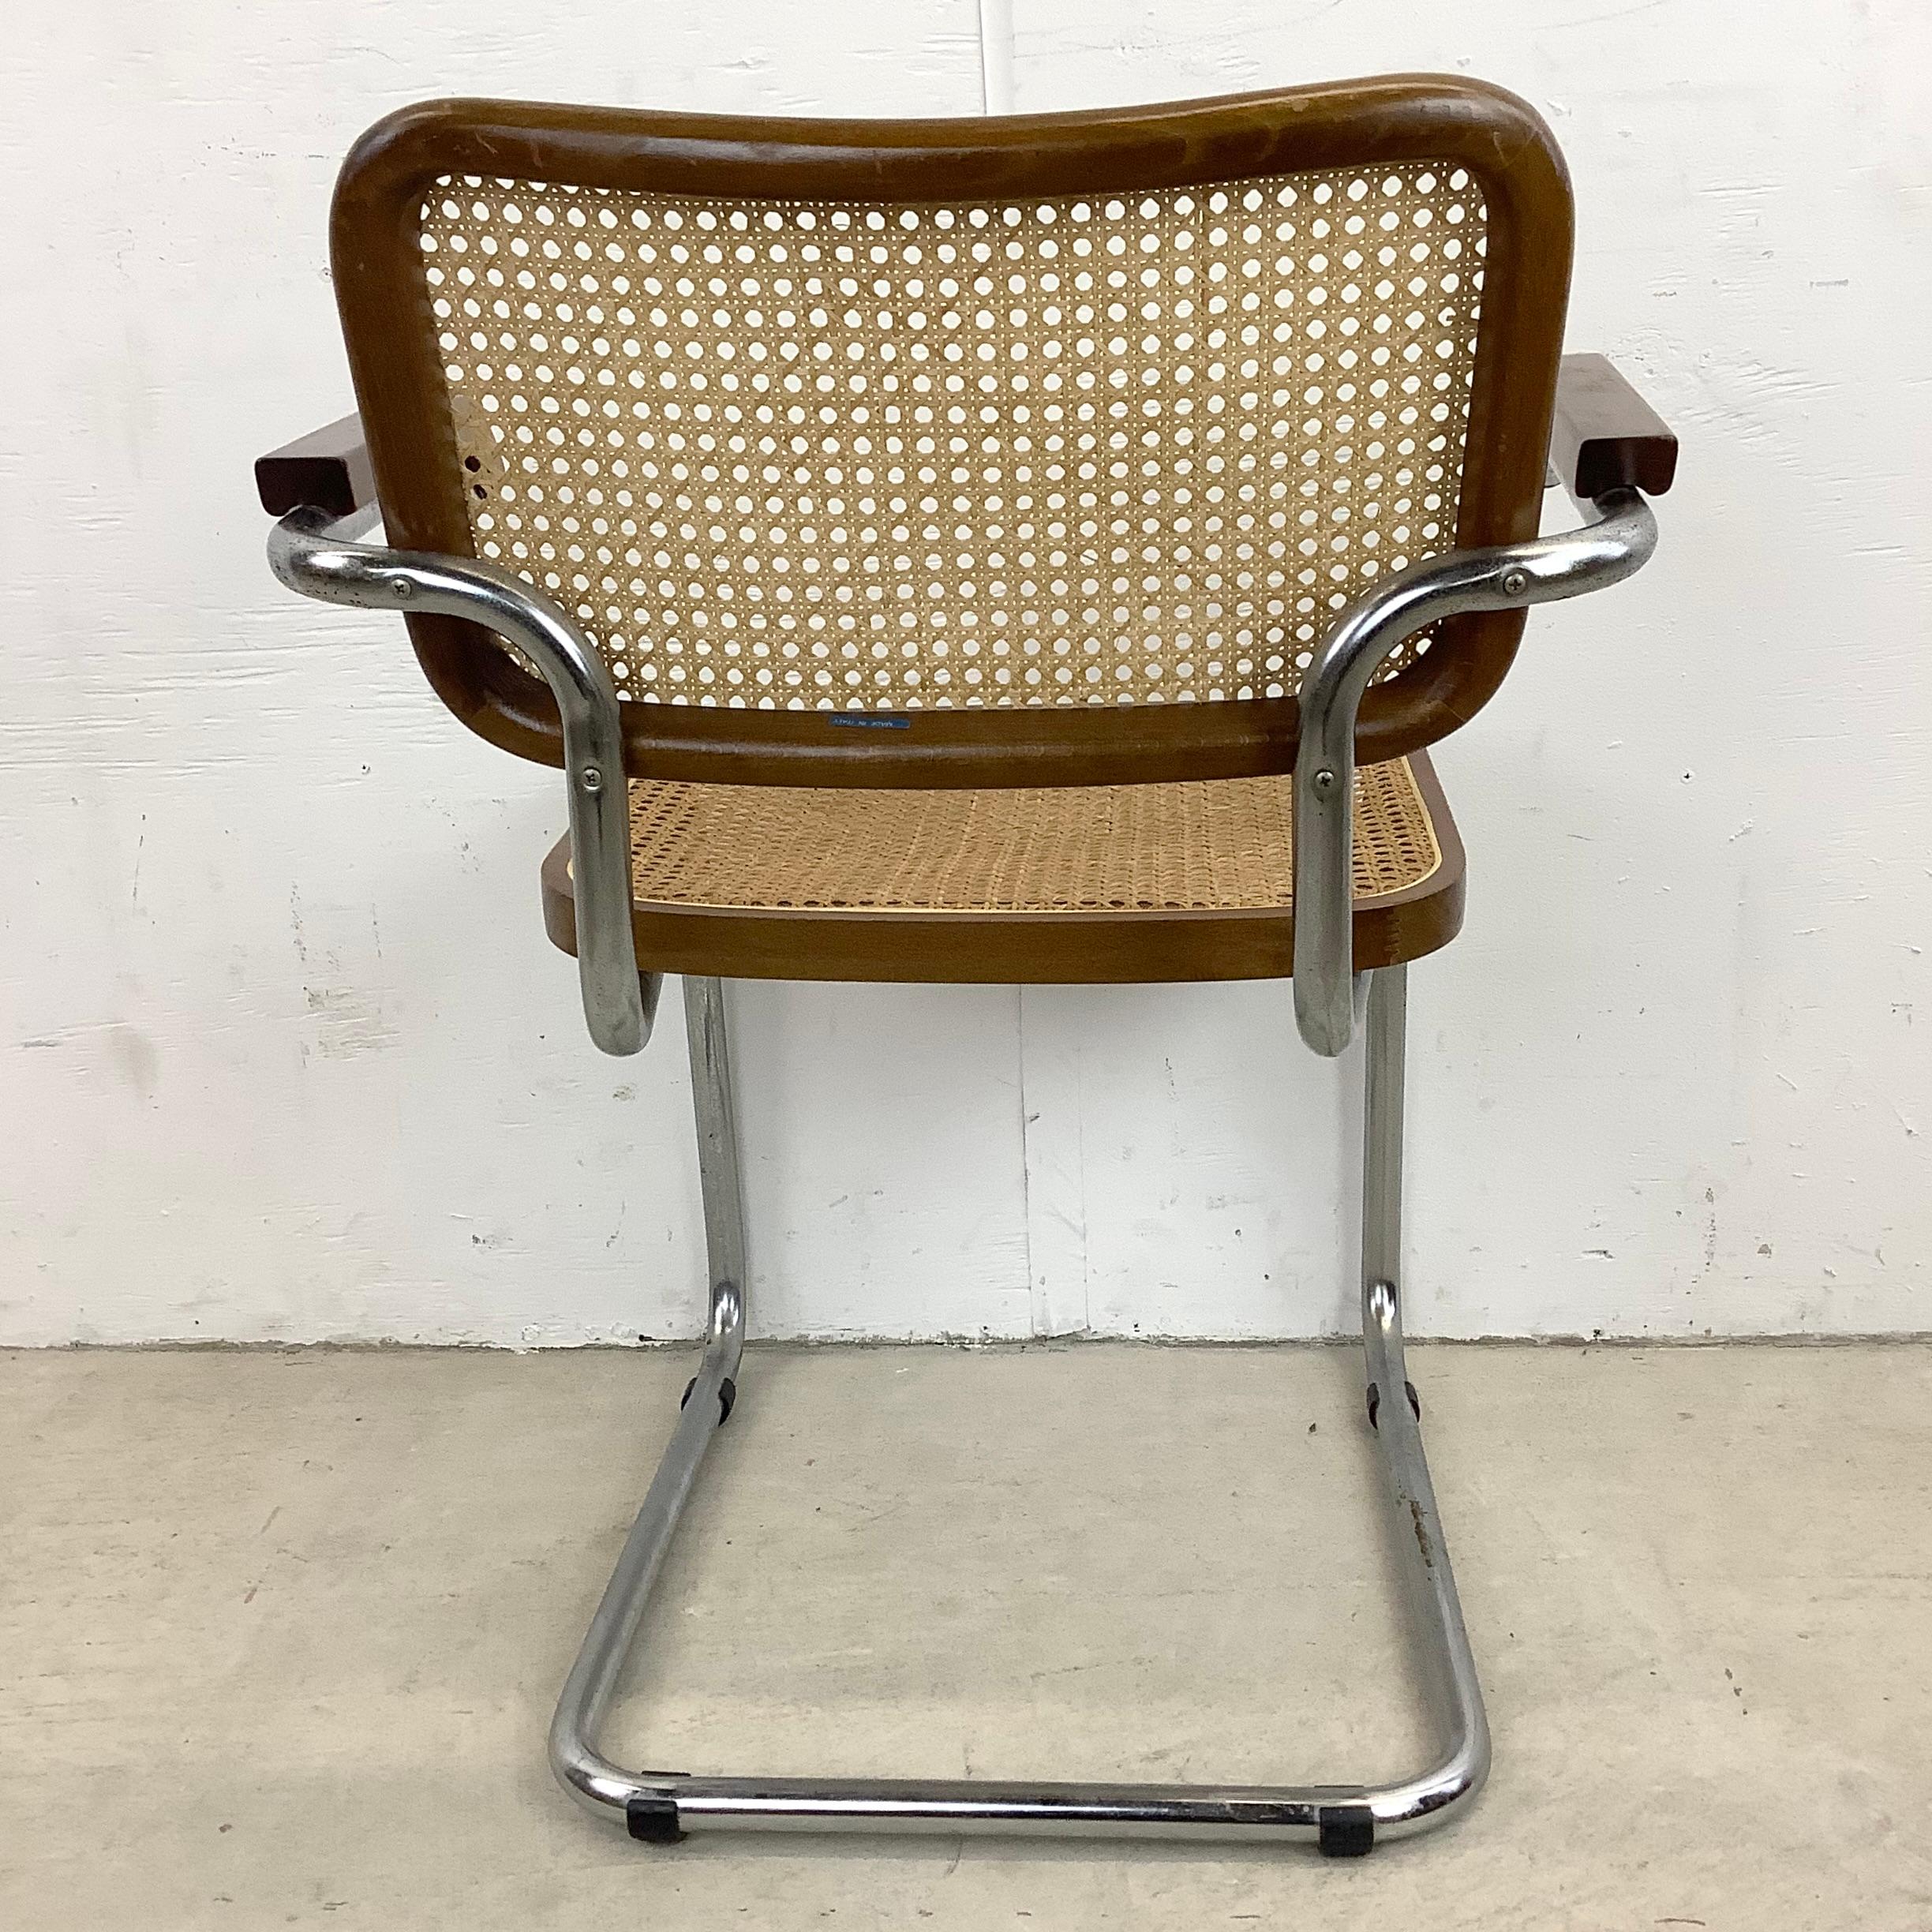 Midcentury Cesca Style Cane Seat Dining Chair, Made in Italy 2